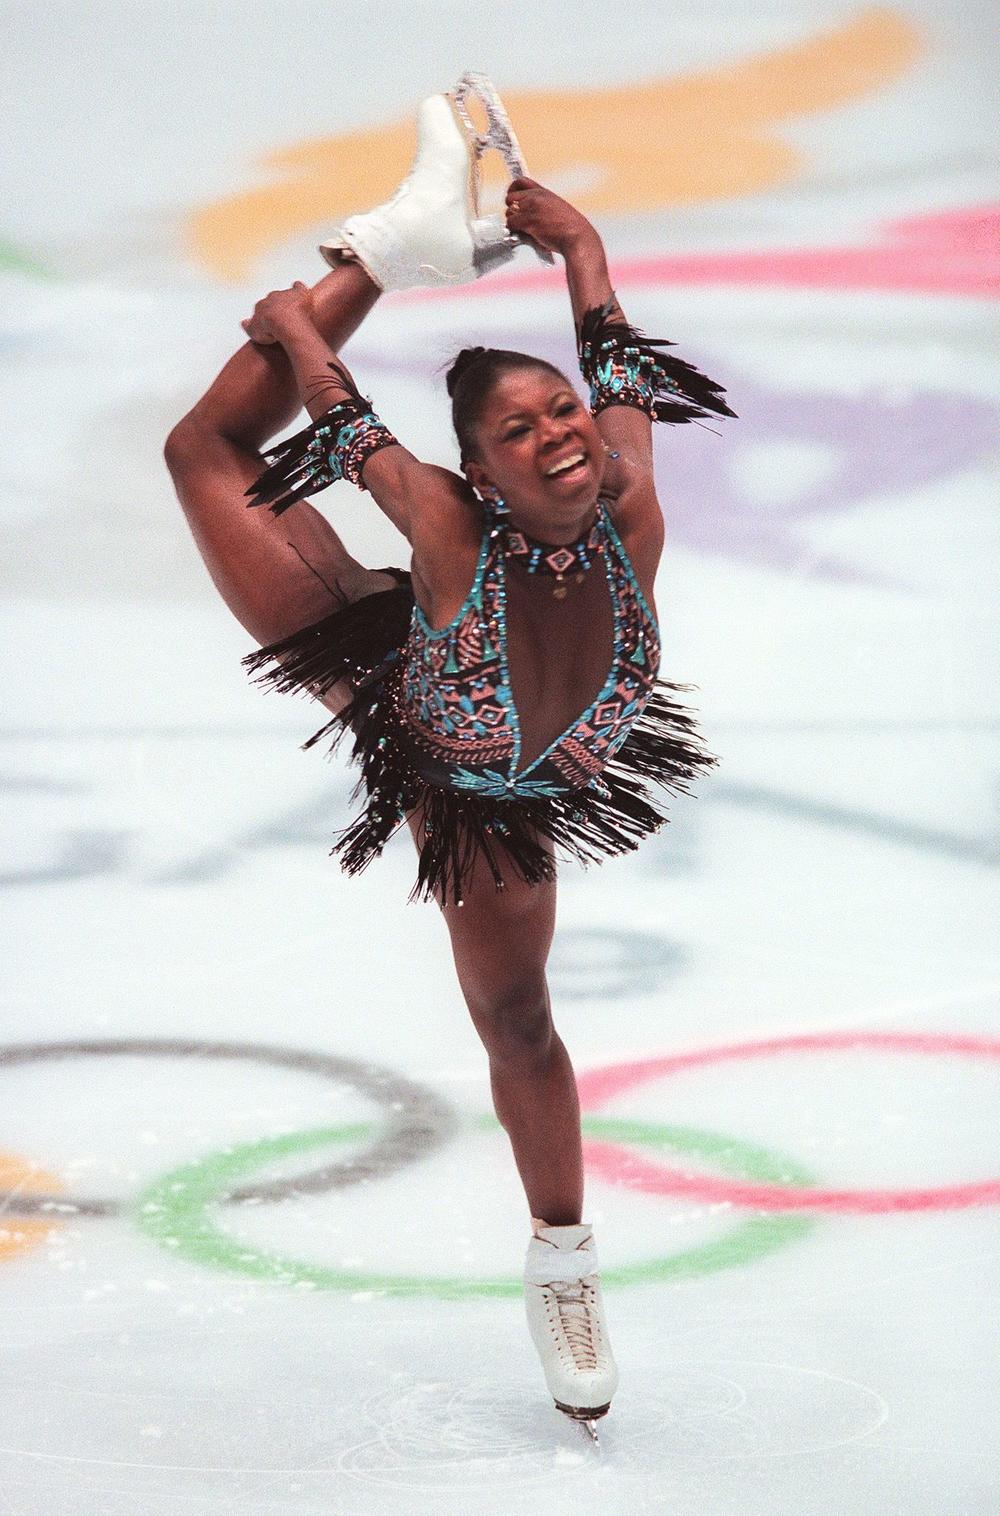 Surya Bonaly of France performs her short program in the women's figure skating competition at the 1998 Nagano, Winter Olympics. Bonaly was the first woman to attempt a quad jump in competition.